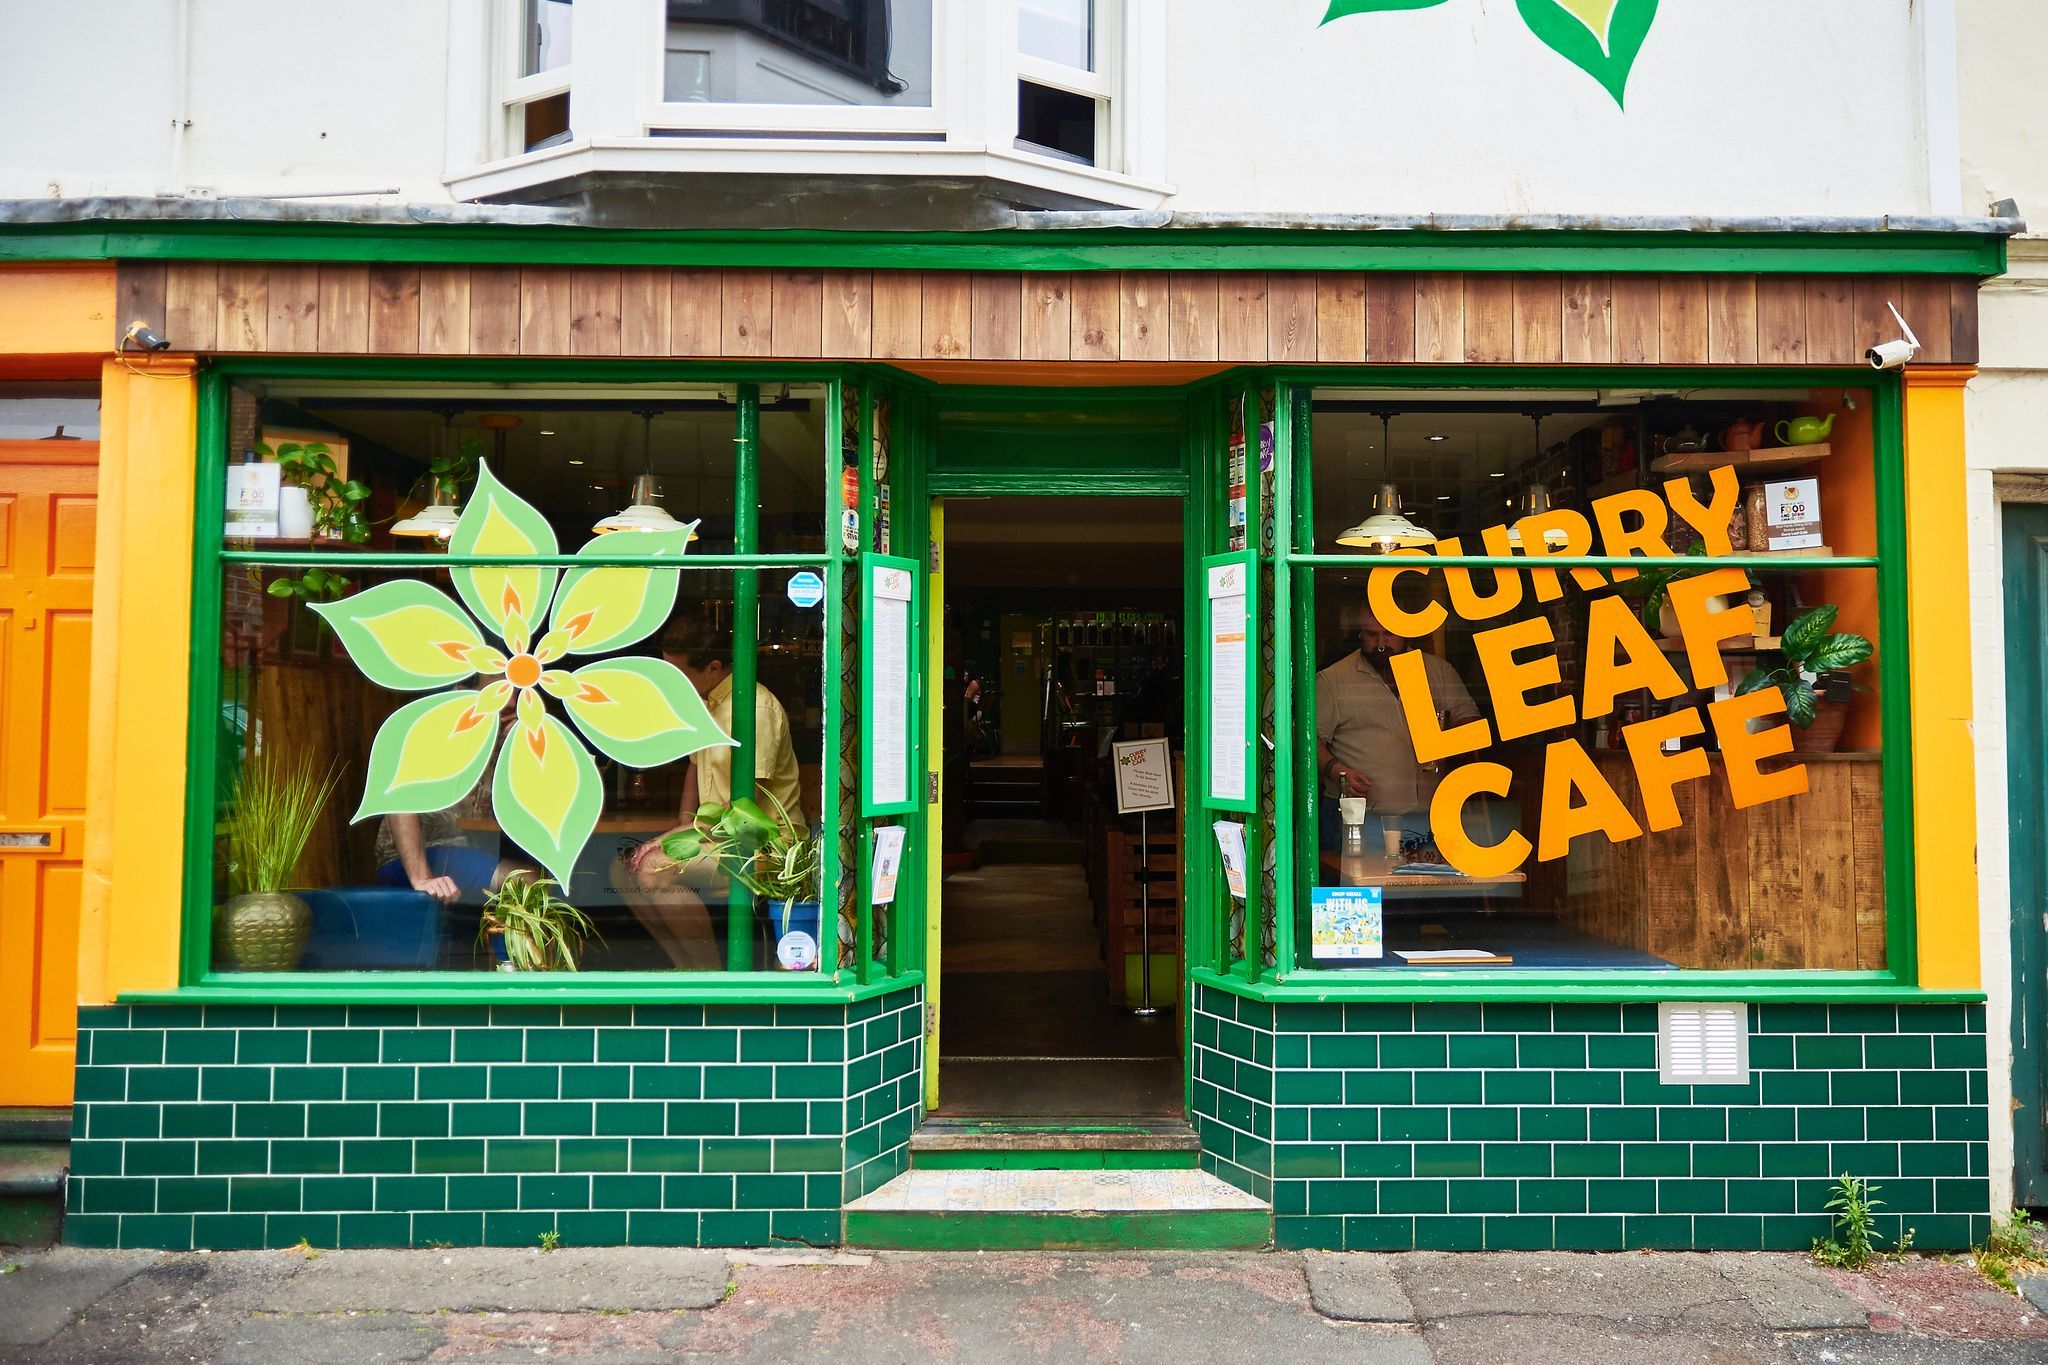 Mouthwatering new brunch menu at the Curry Leaf Cafe. Exterior shot of the cafe and restaurant